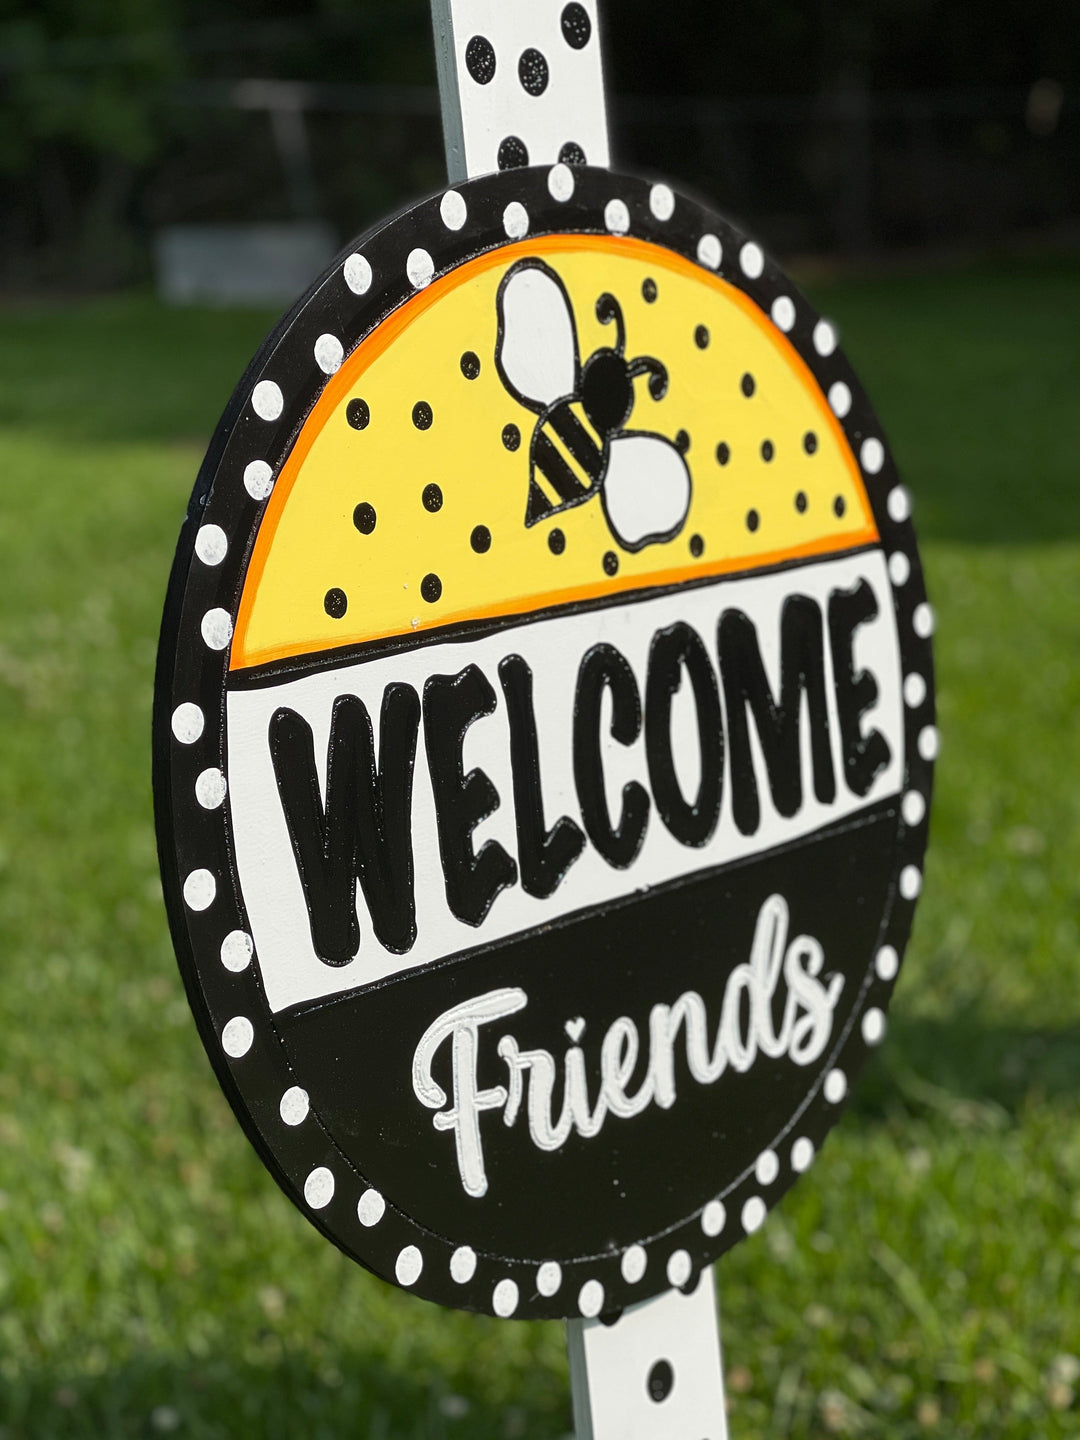 Bumble Bee Welcome Sign Yard Art Decoration